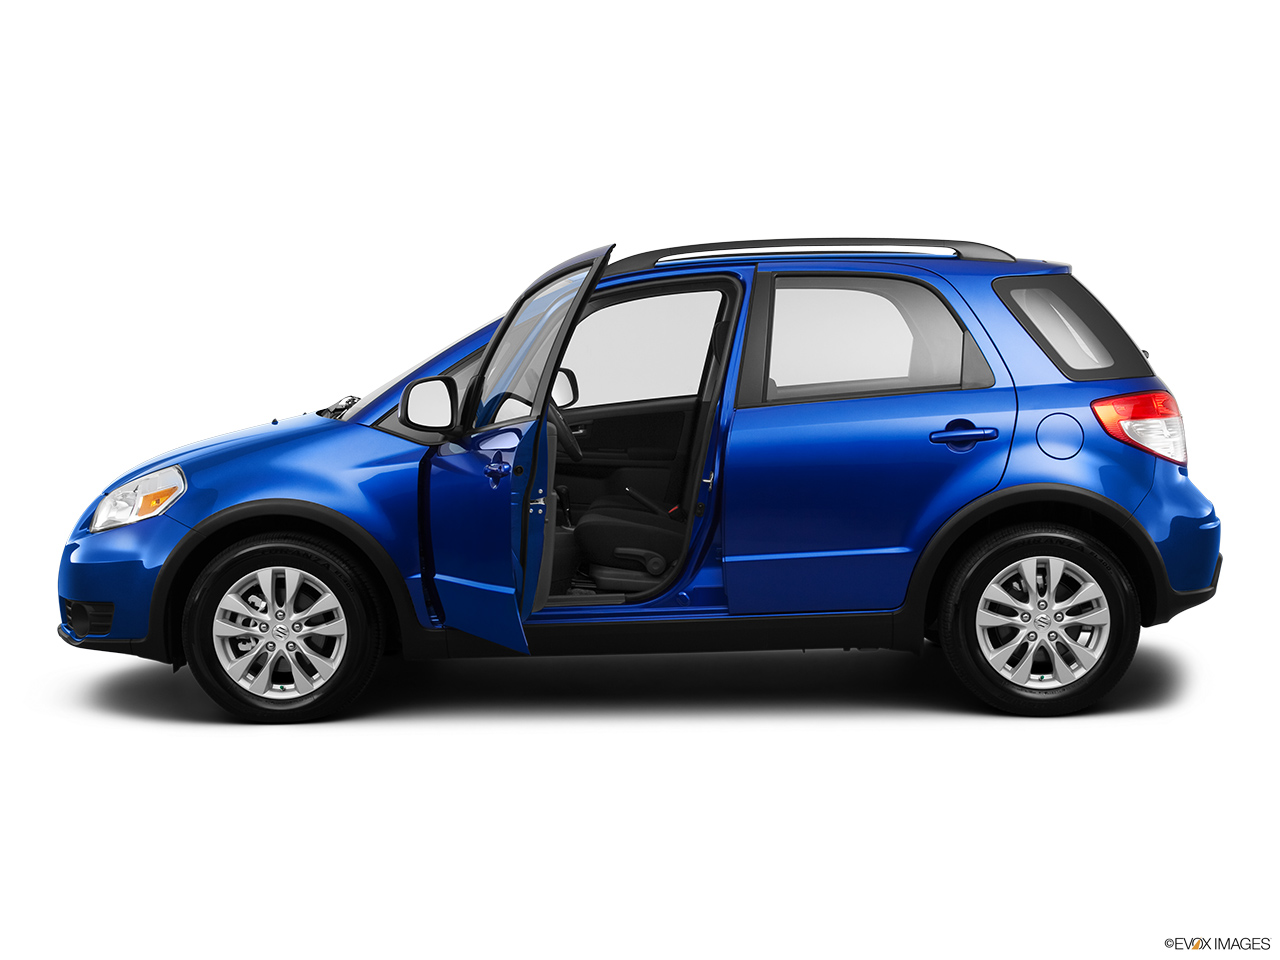 2013 Suzuki SX4 AWD Crossover Premium AT AWD Driver's side profile with drivers side door open. 